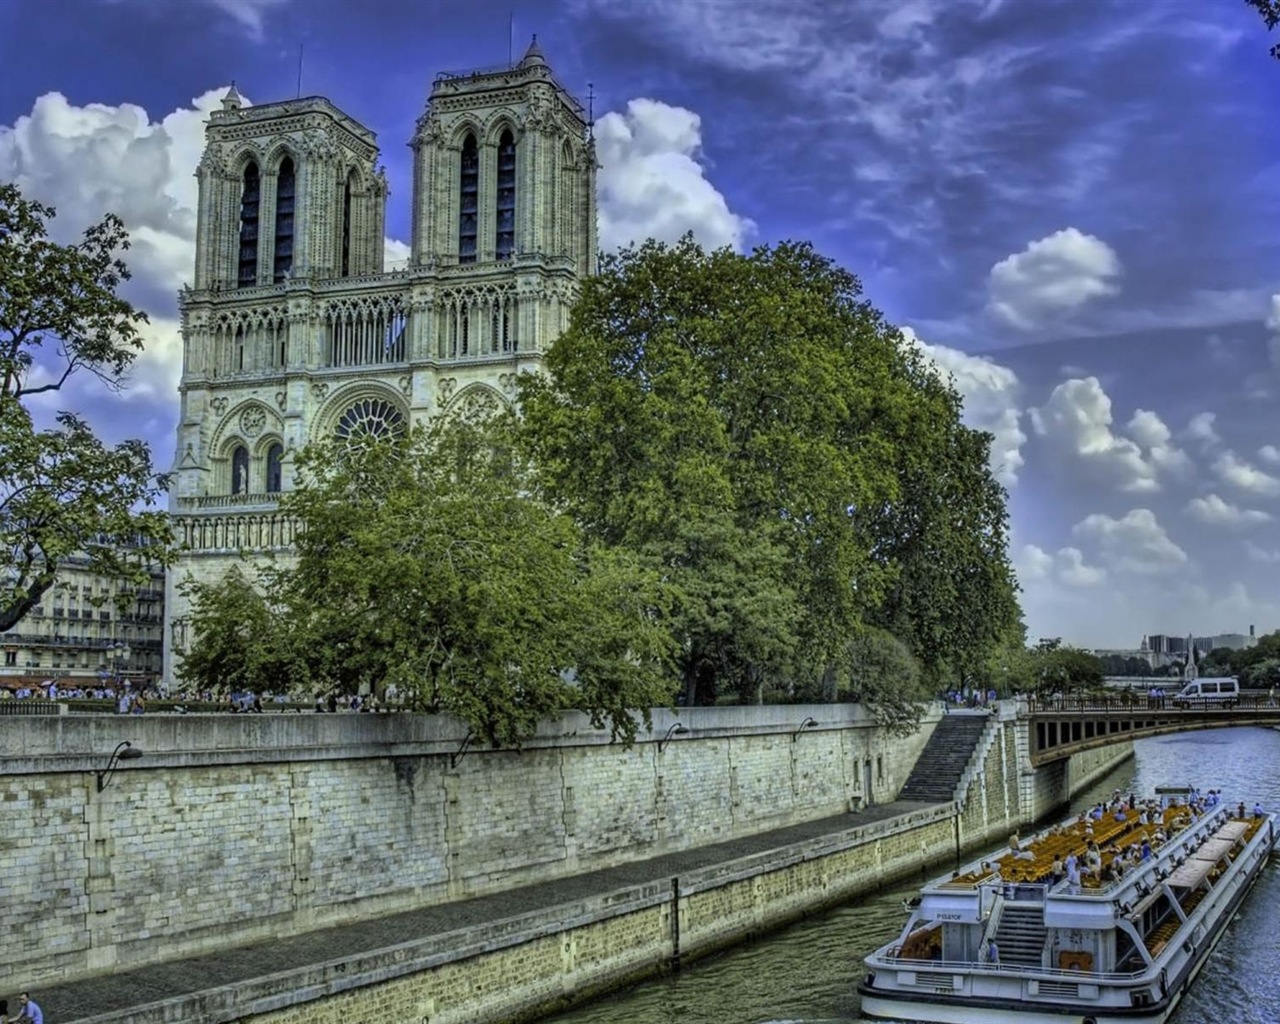 Notre Dame HD Wallpapers #10 - 1280x1024